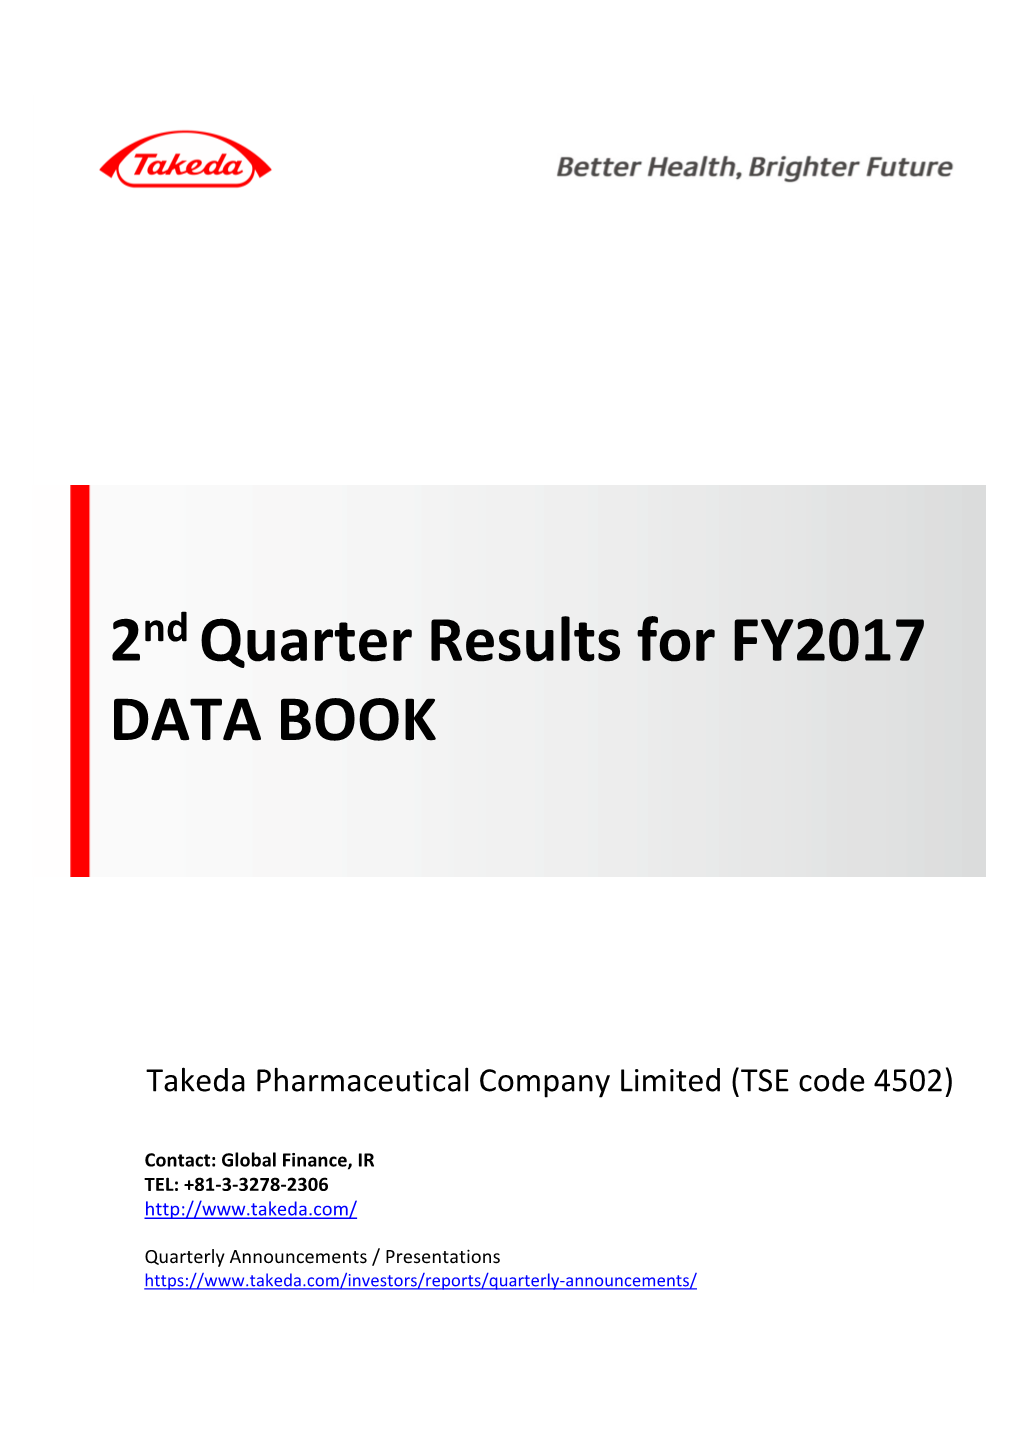 2Nd Quarter Results for FY2017 DATA BOOK